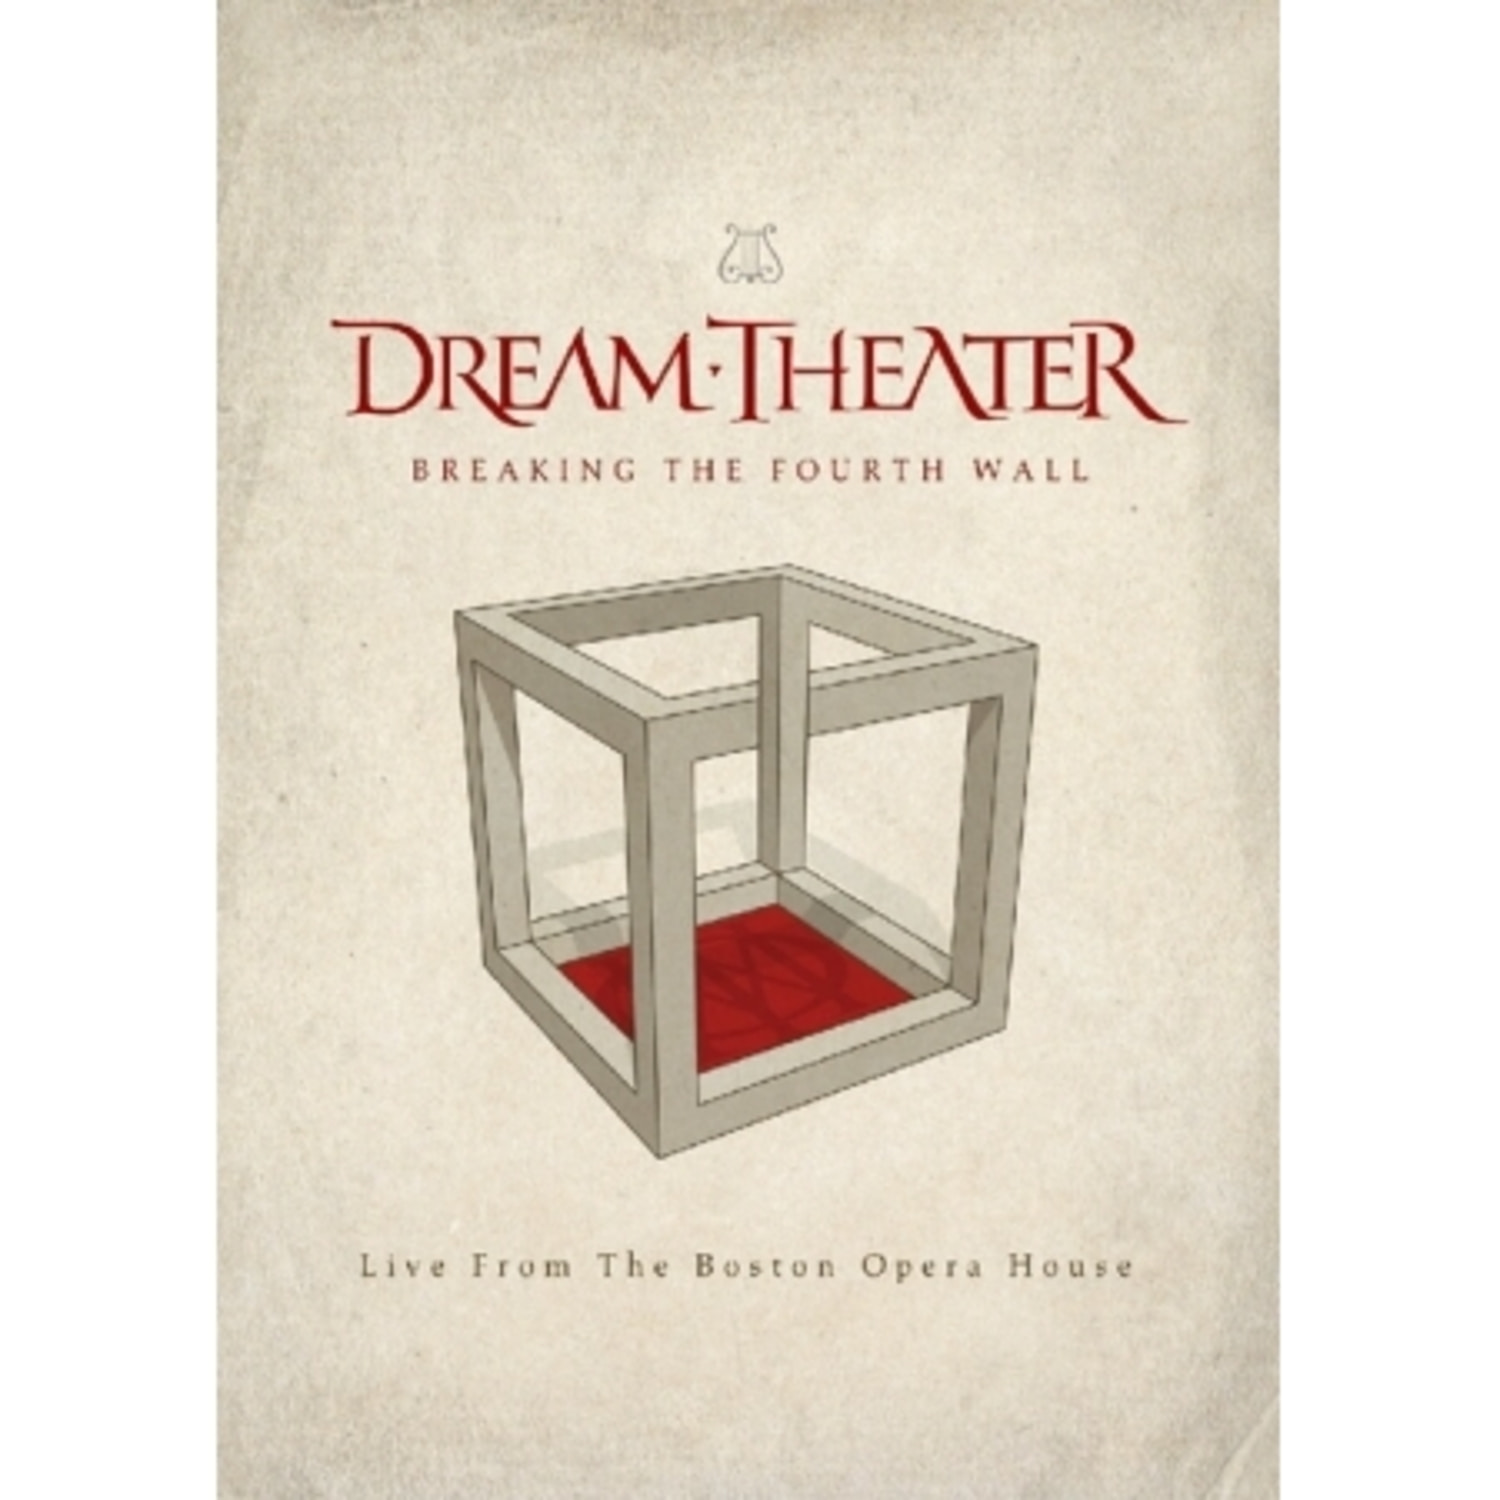 DREAM THEATER - BREAKING THE FOURTH WALL (LIVE FROM THE BOSTON OPERA HOUSE) (2 DISC)